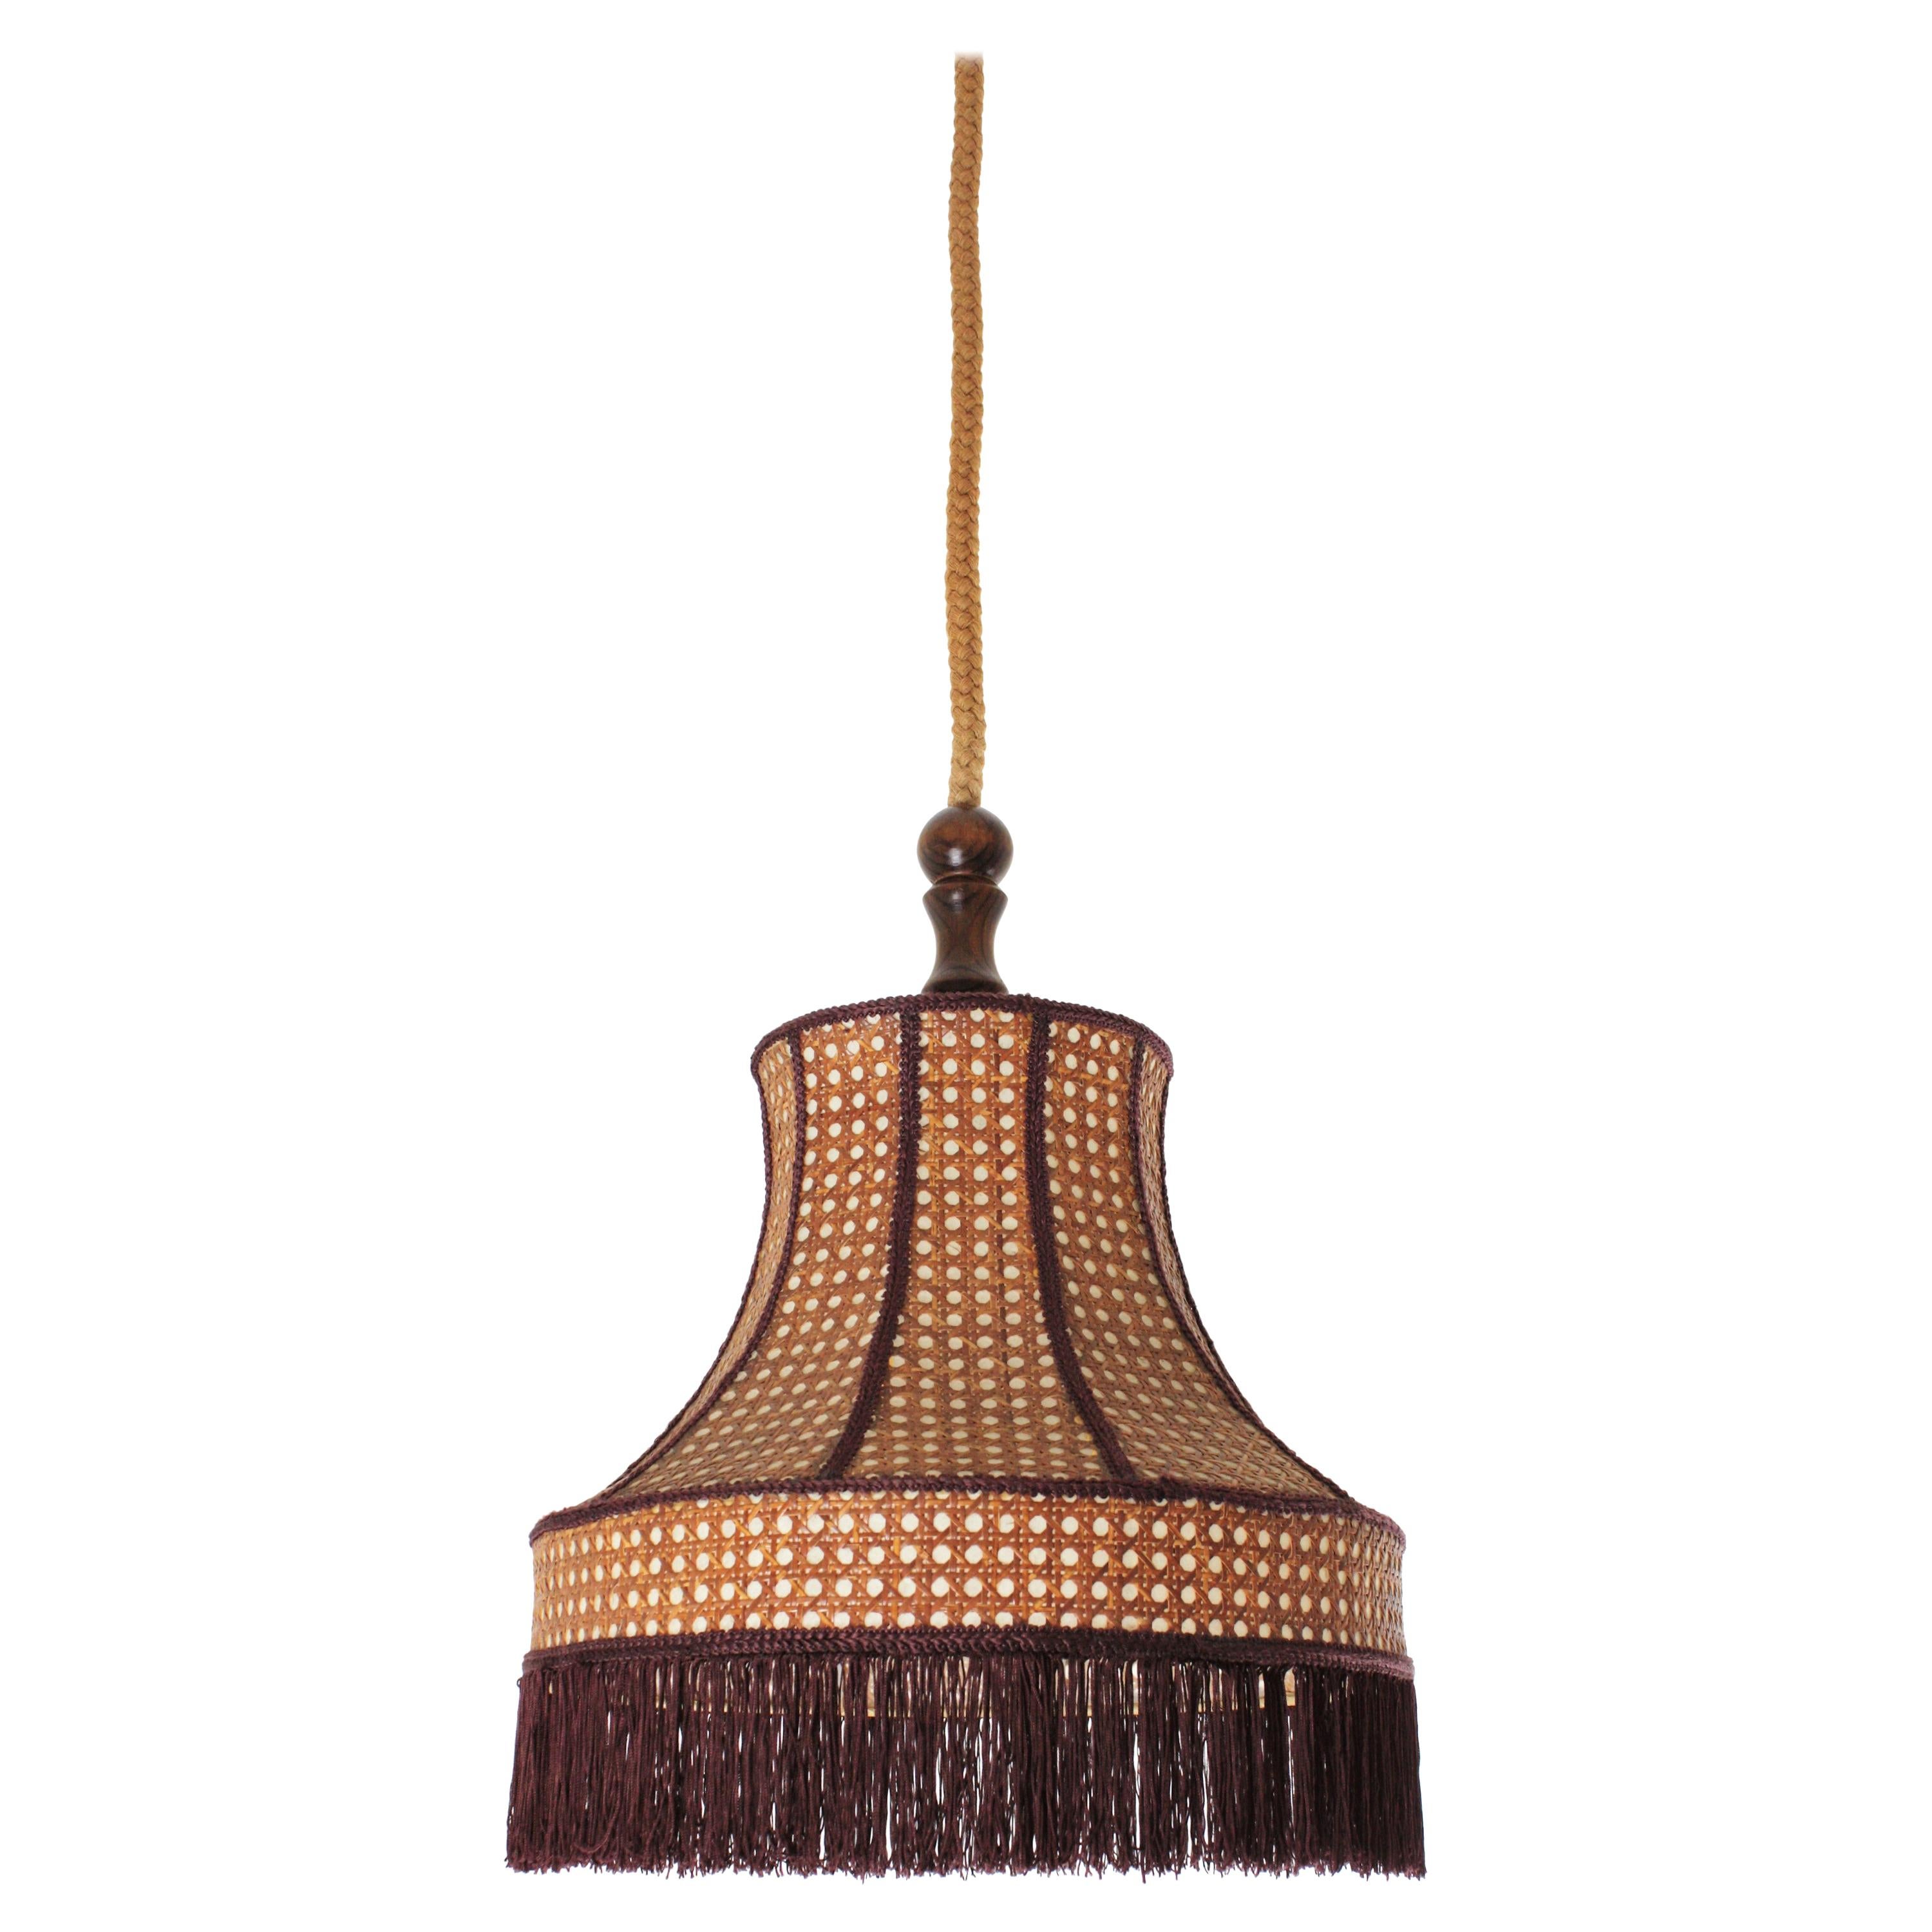 Rattan Wicker Pendant Hanging Lamp with Pagoda Shape and Fringed Bottom